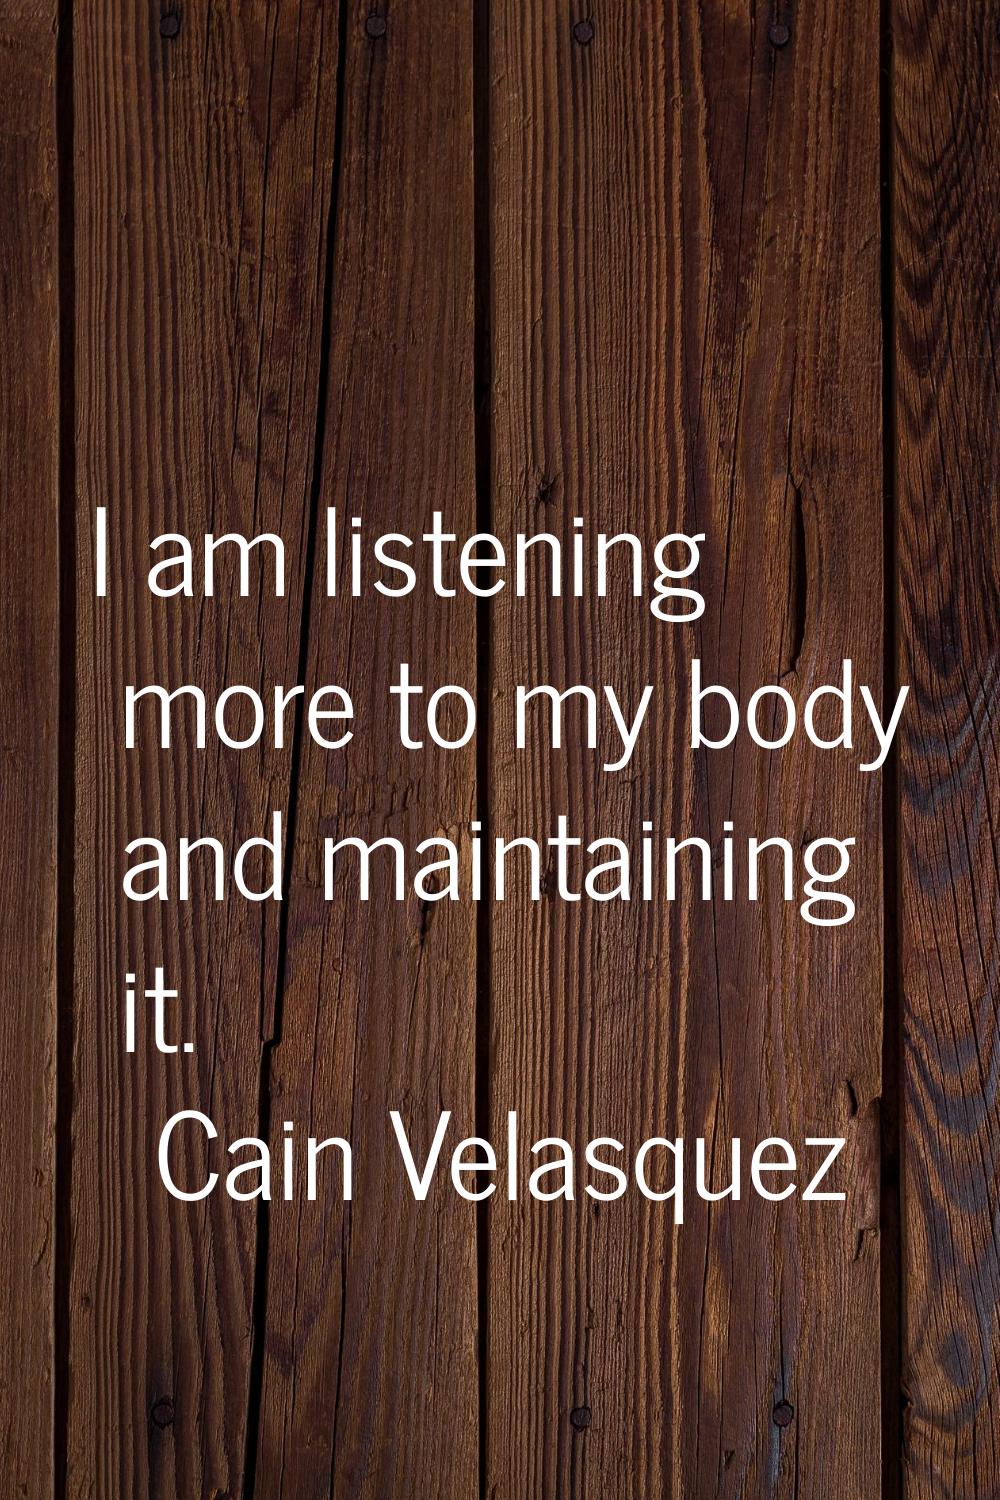 I am listening more to my body and maintaining it.